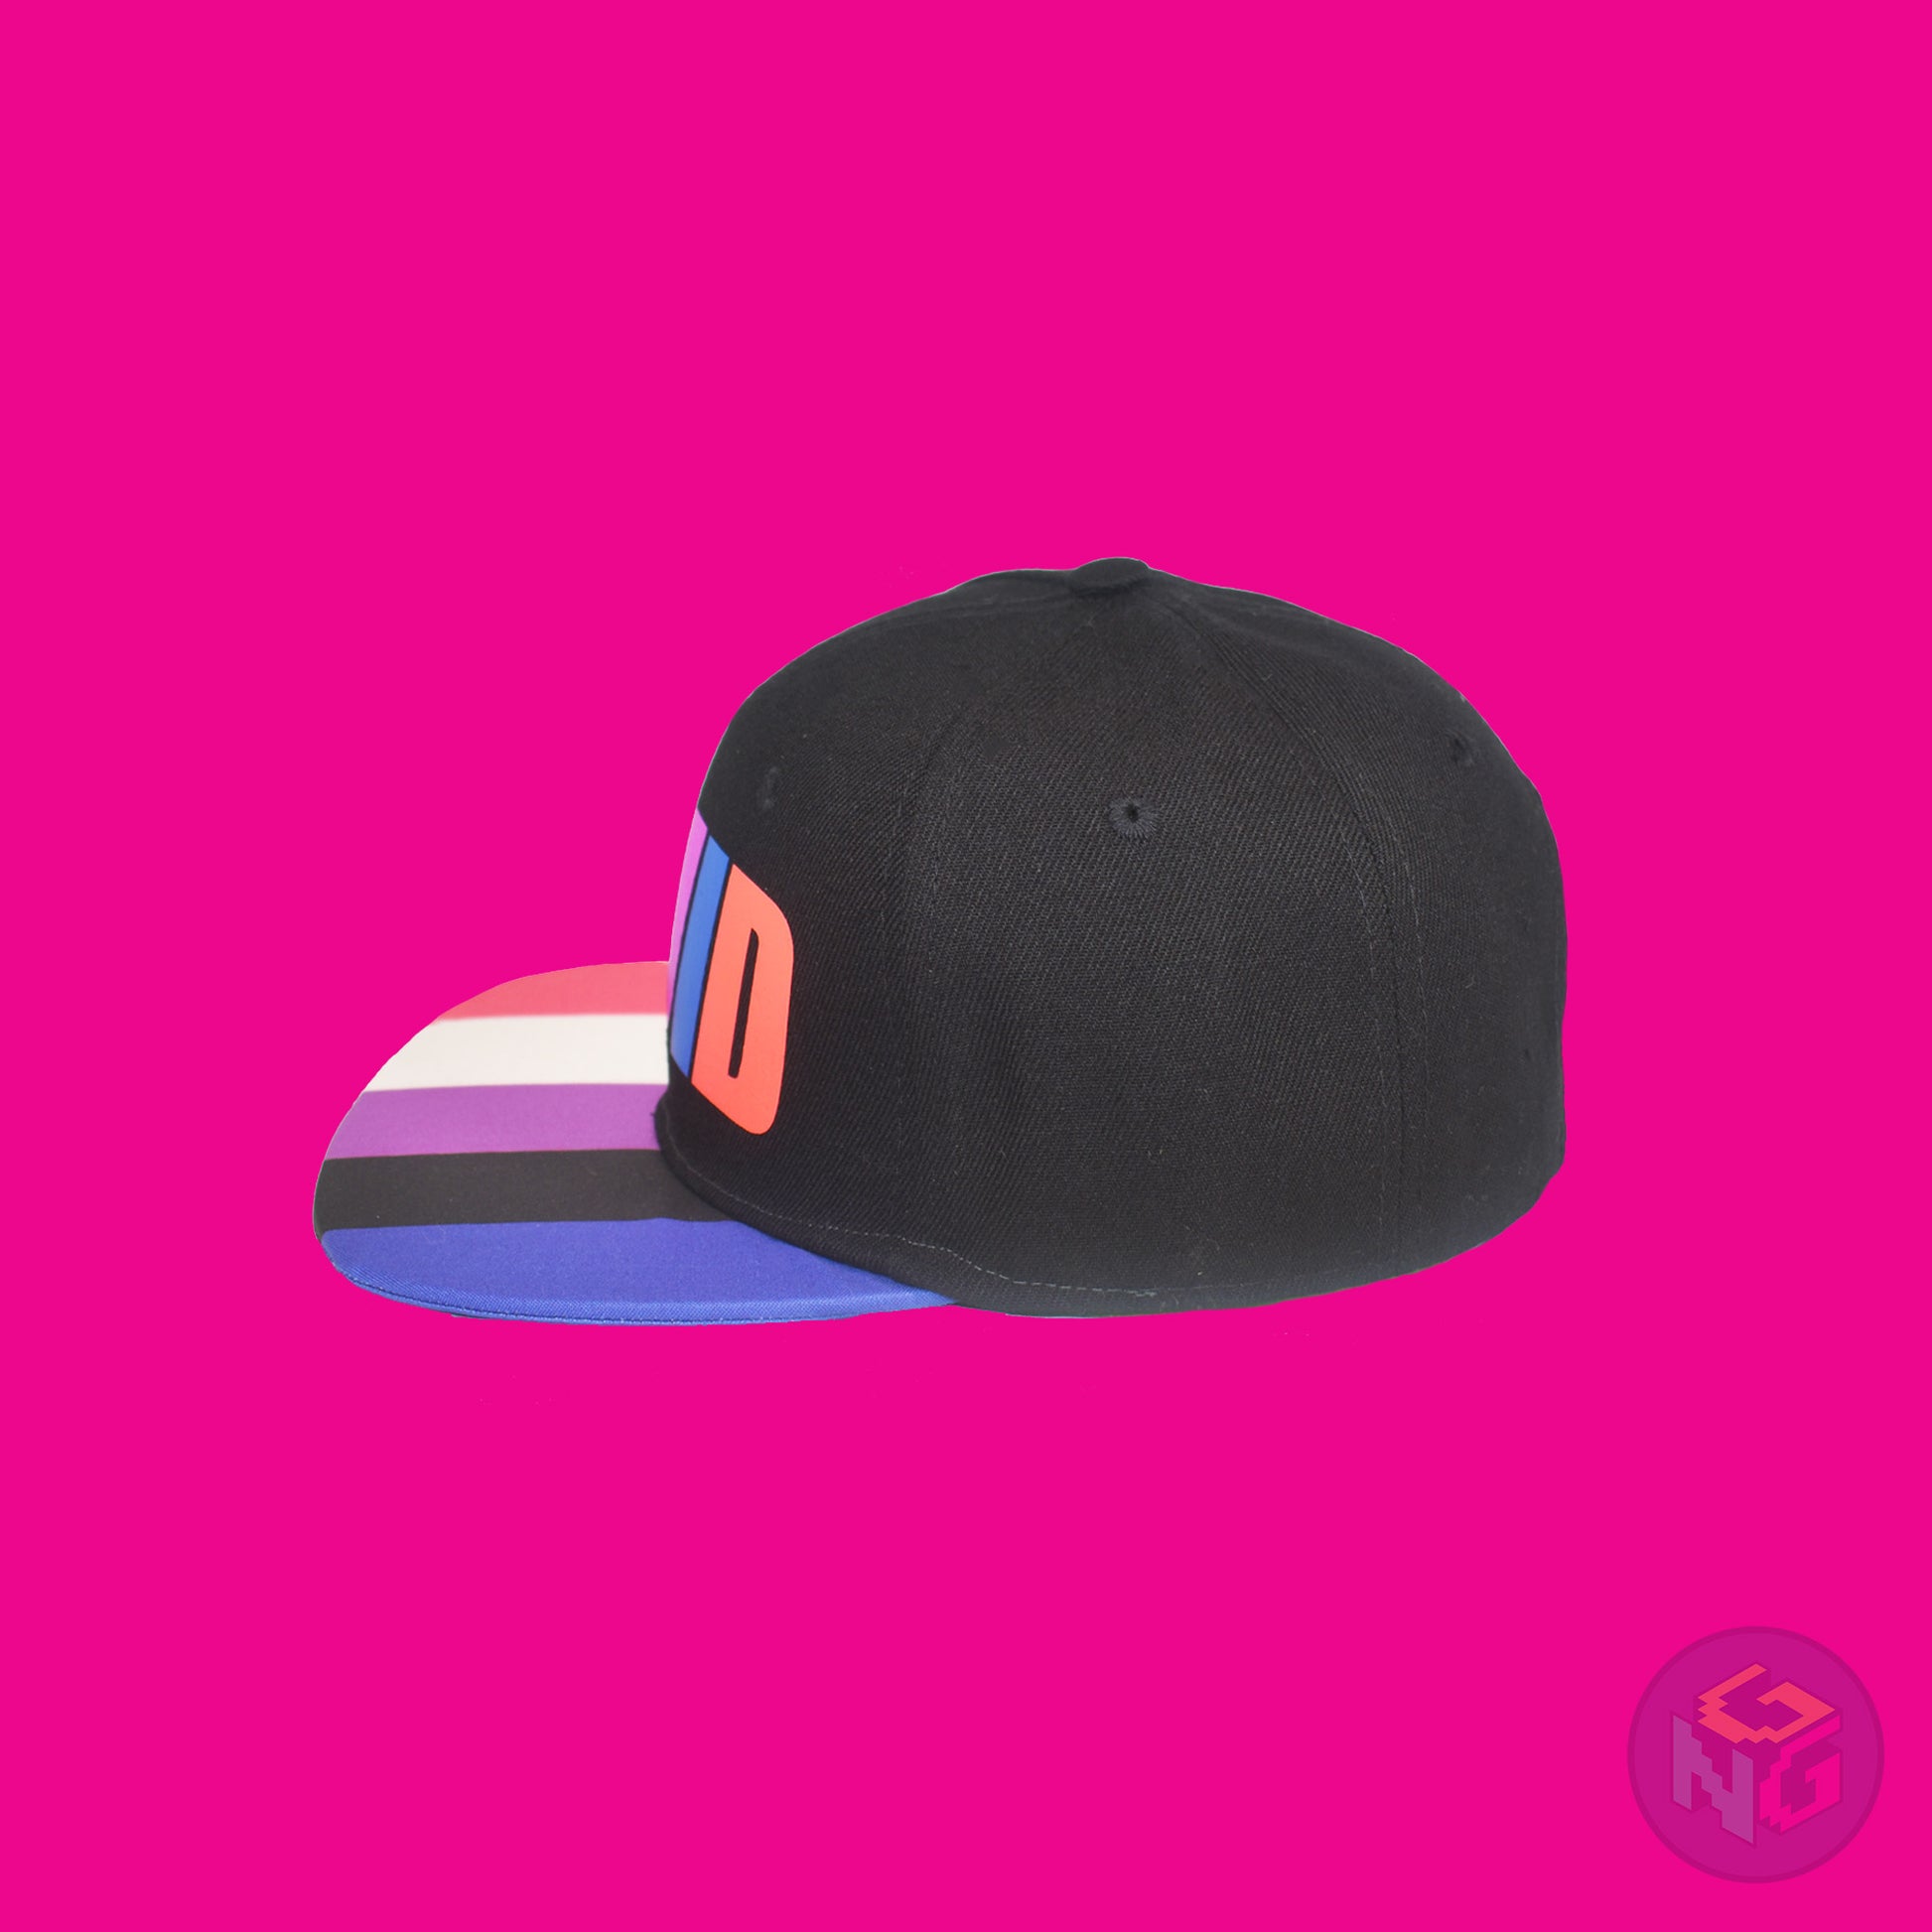 Black flat bill snapback hat. The brim has the genderfluid pride flag on both sides and the front of the hat has the word “FLUID” in peach, white, magenta, and royal blue letters. Left view